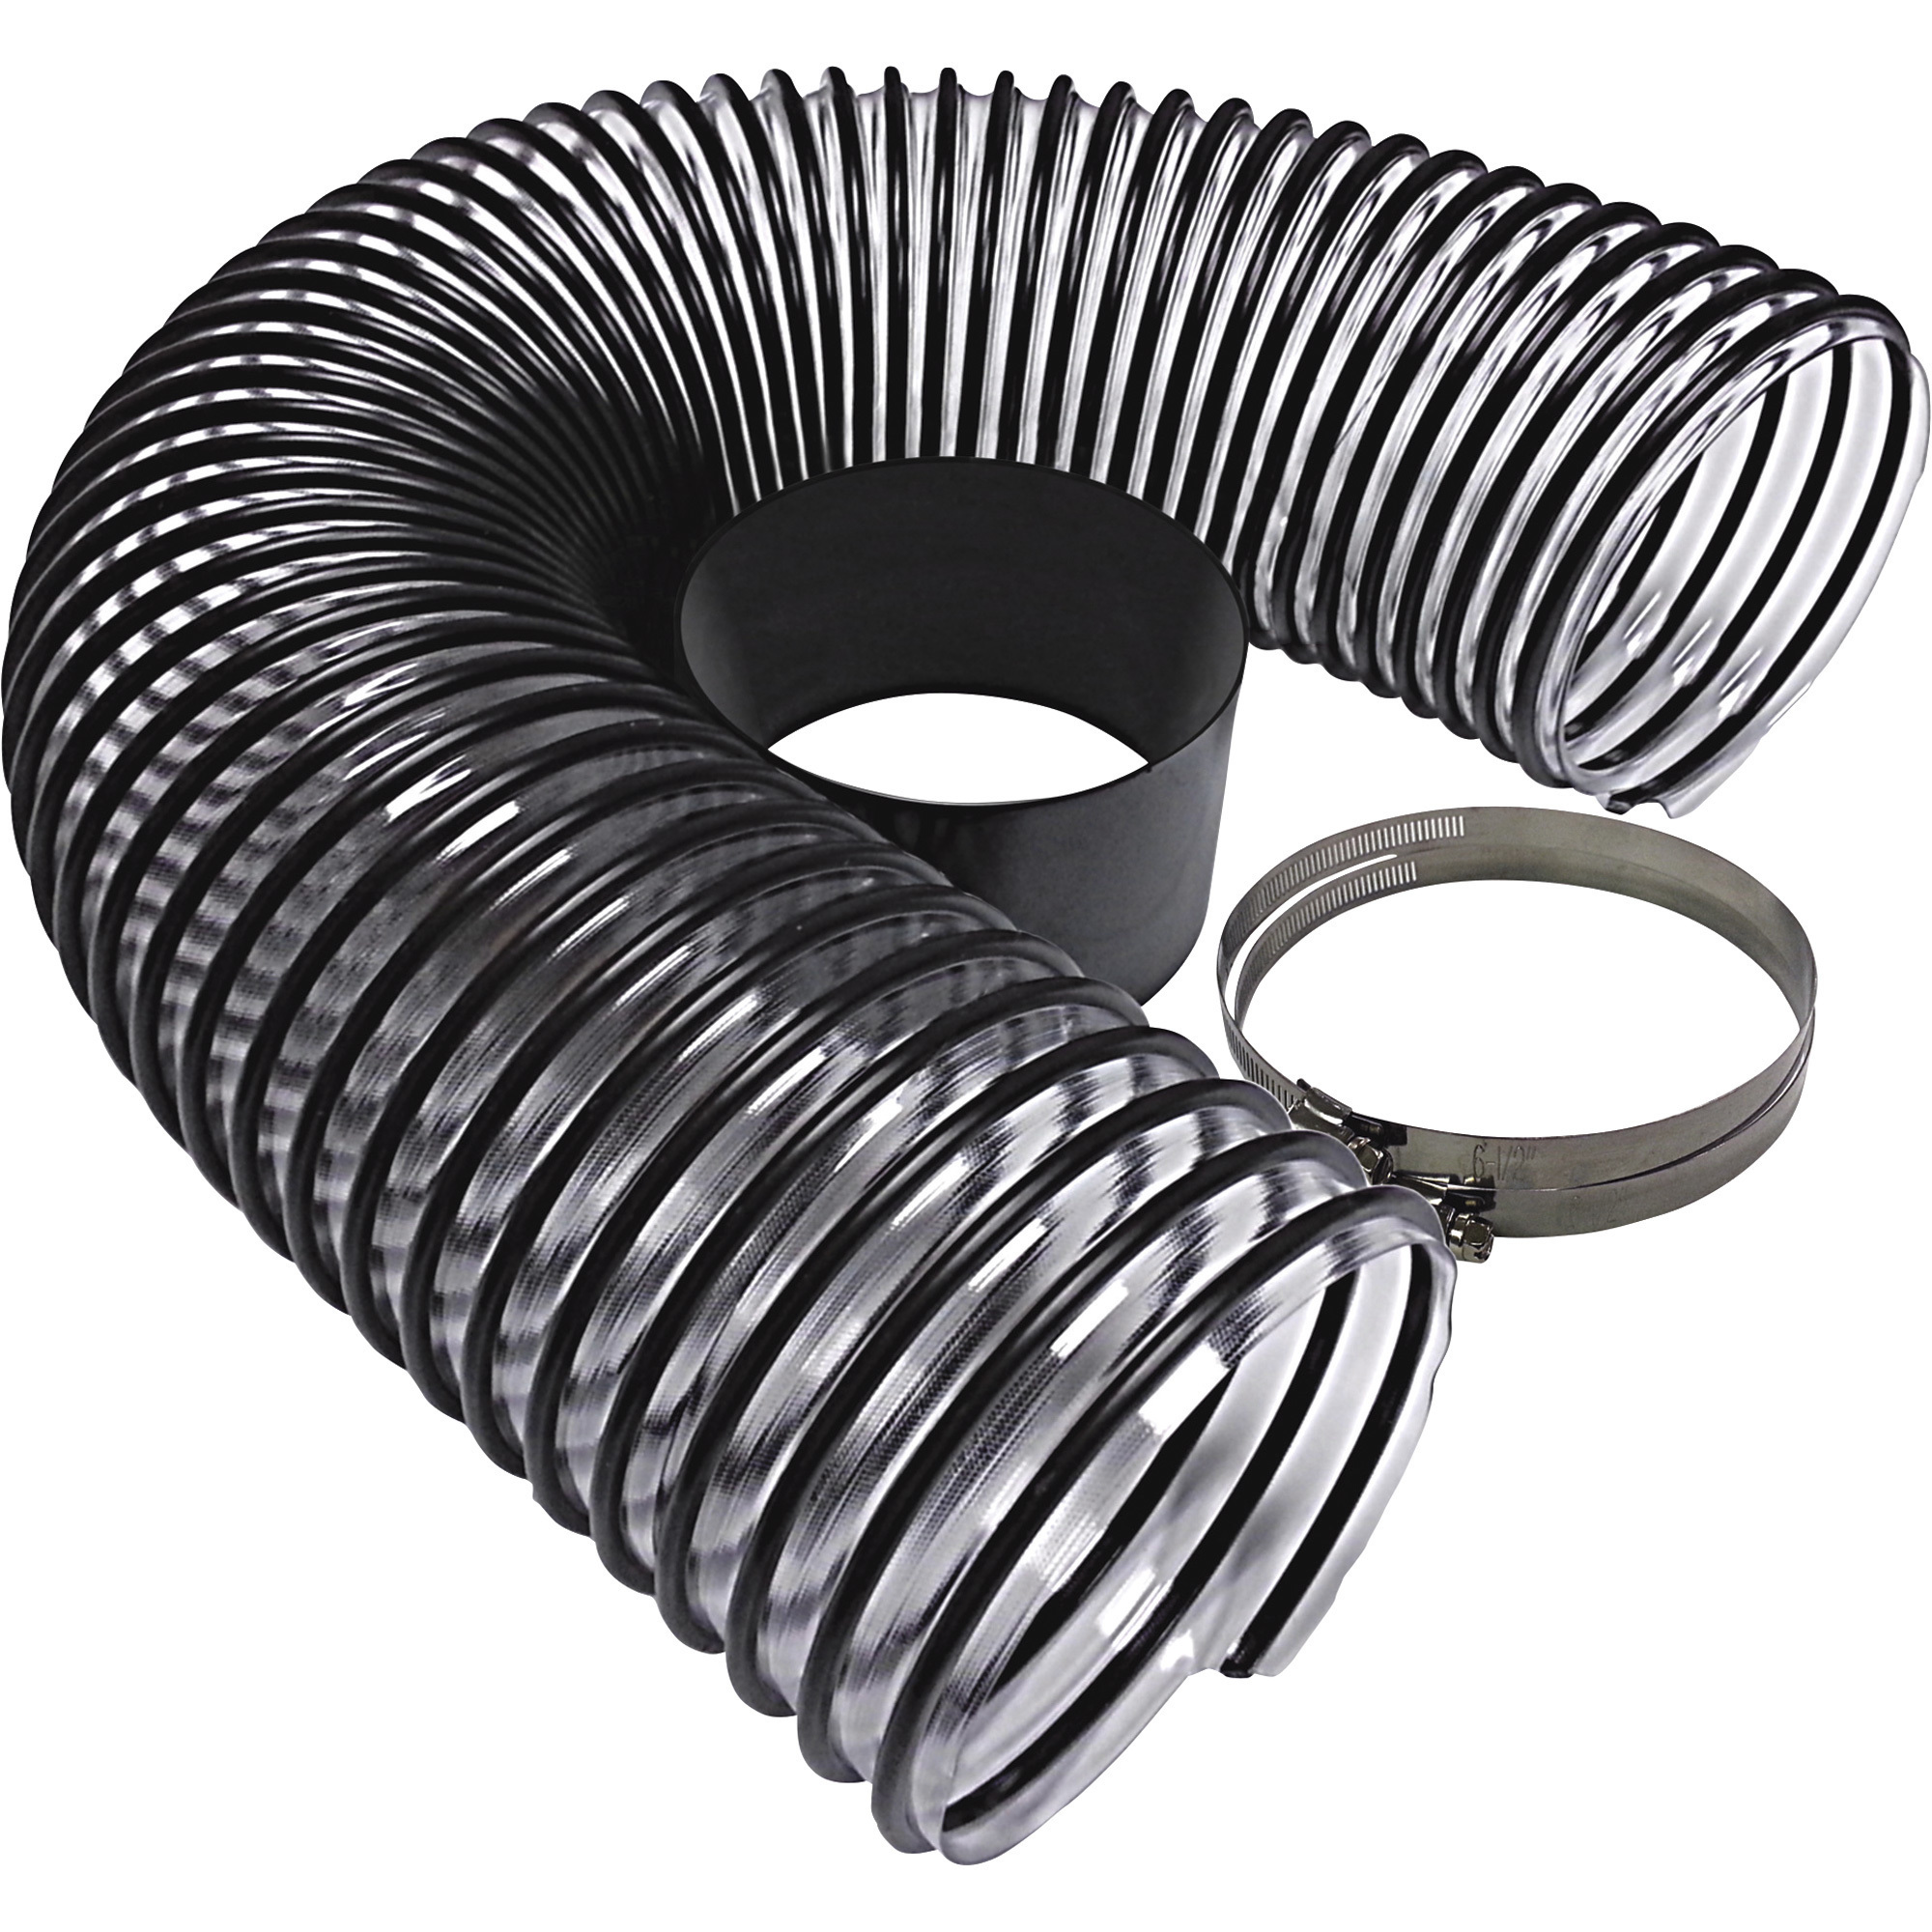 Agri-Fab Vacuum Hose Extension Kit for Zero-Turn Mowers, Works with Item#s 250500 and 250501, Model 65640-VK